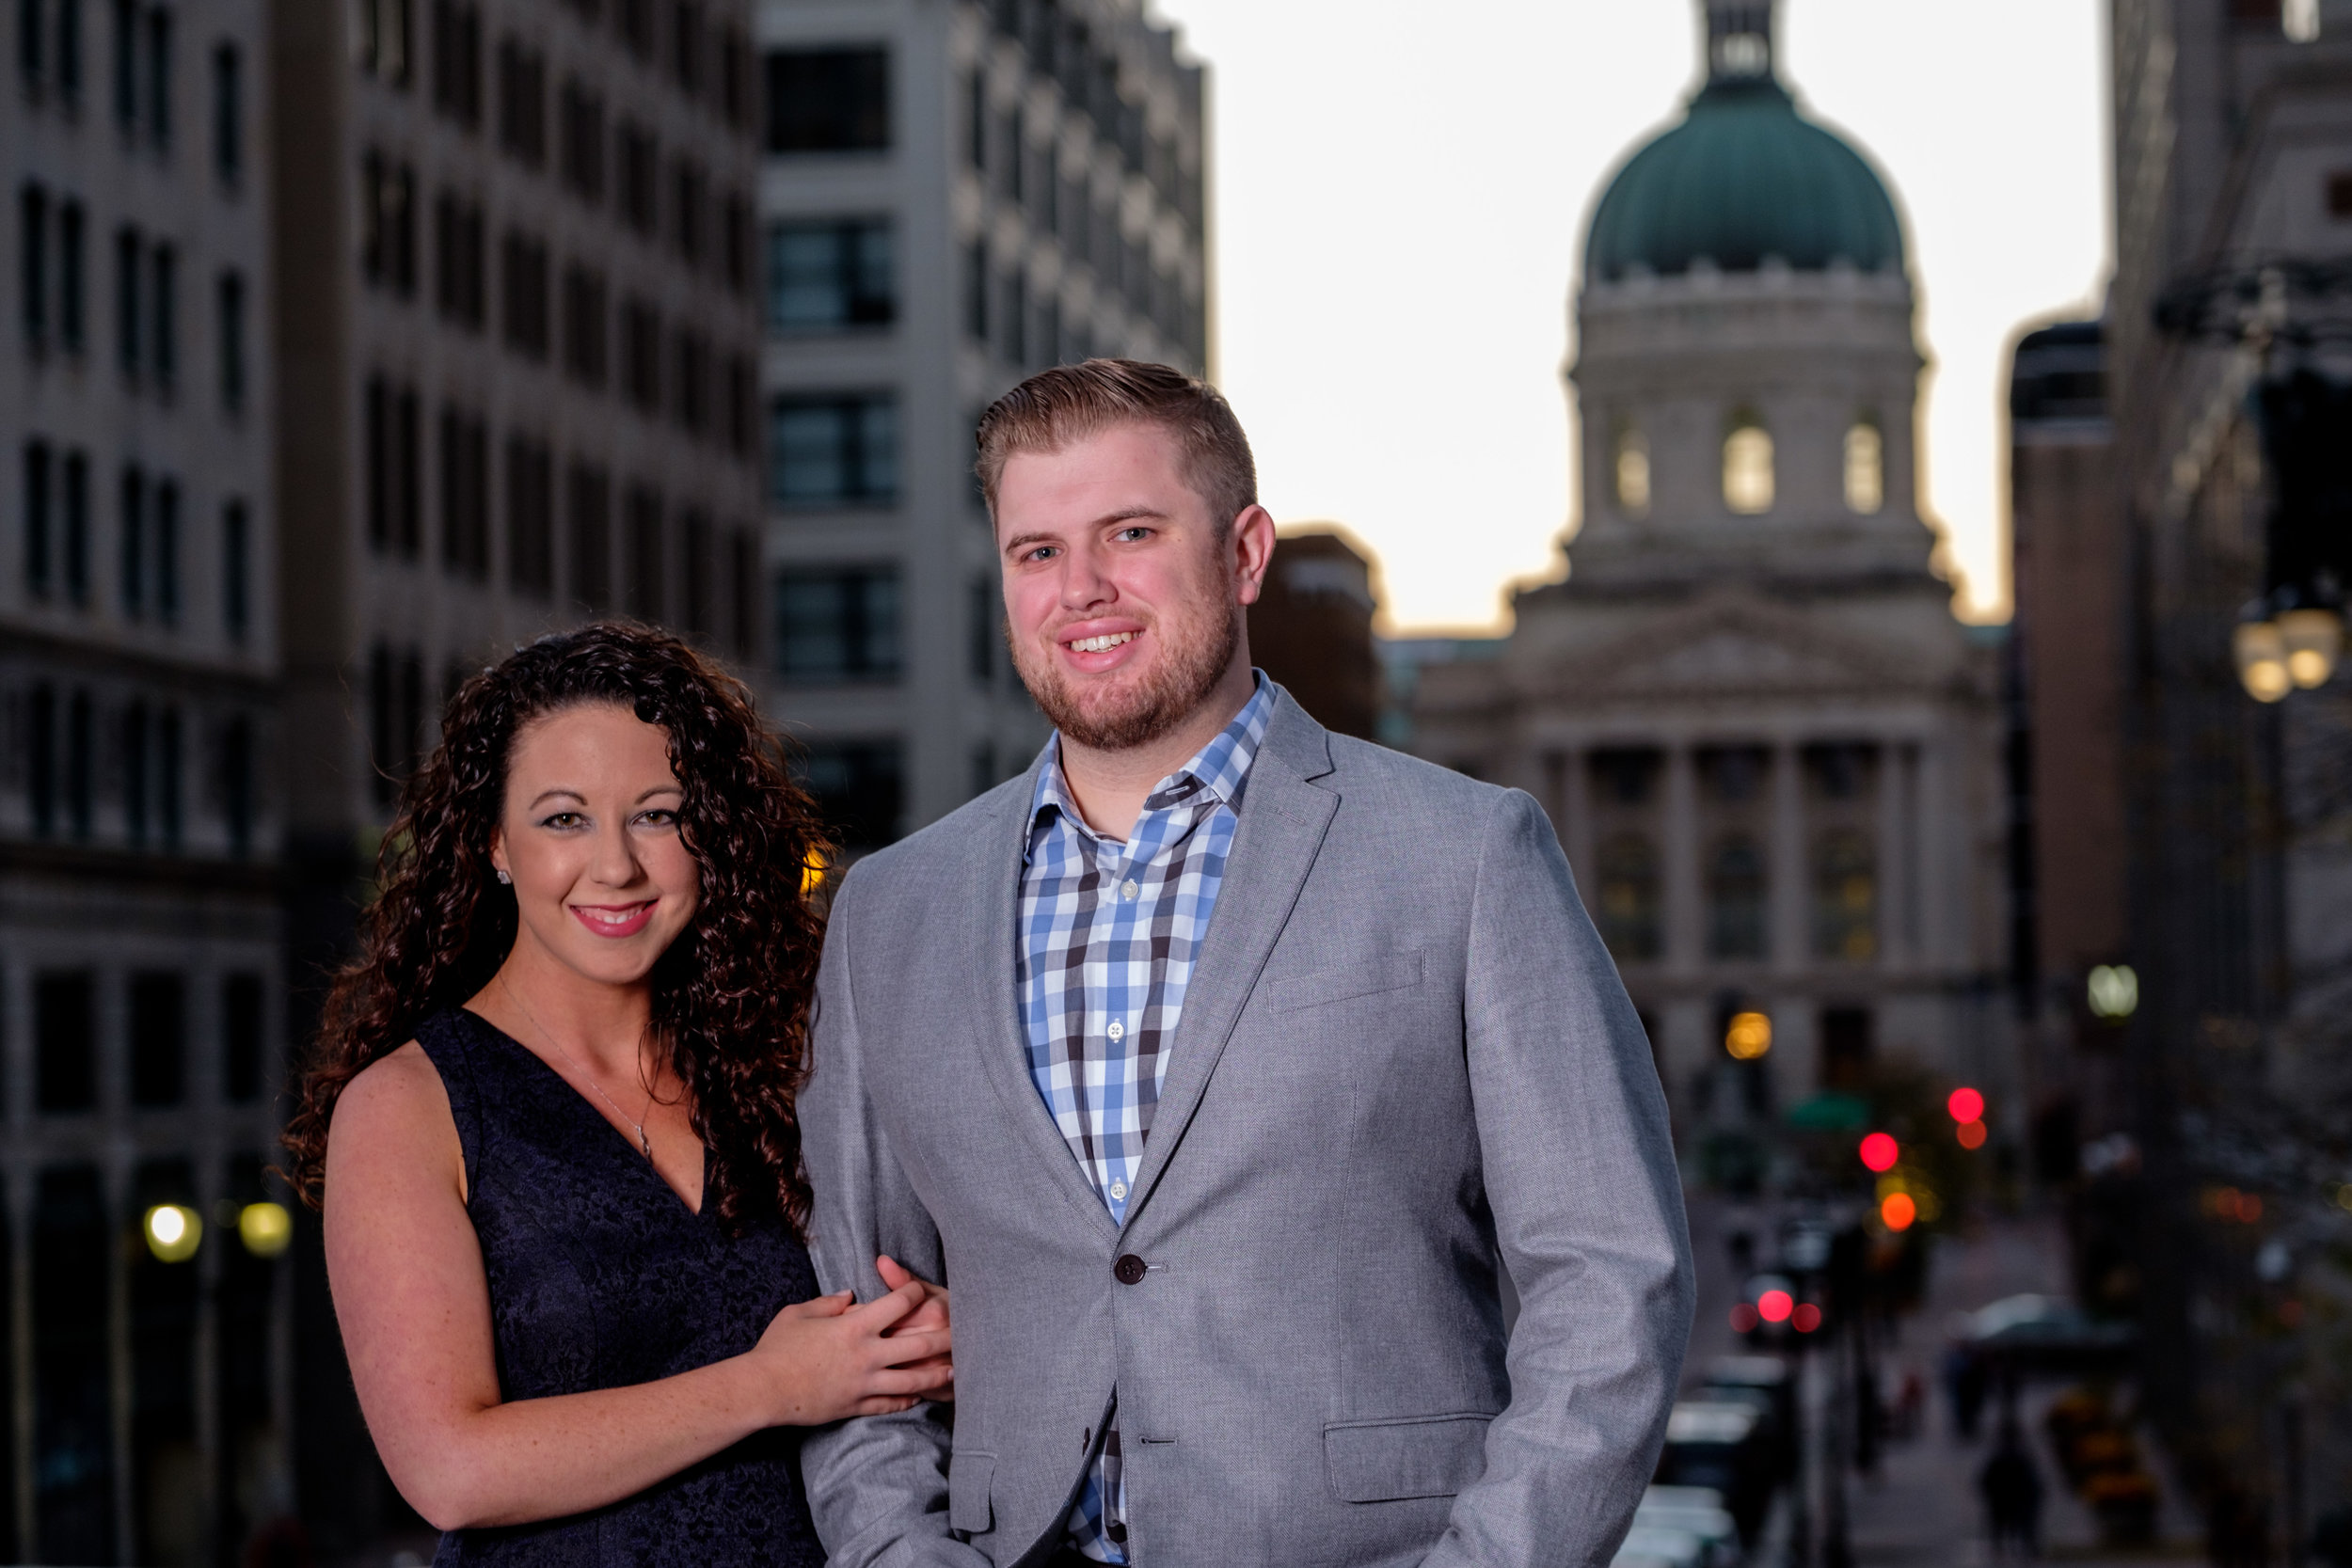 Downtown-Indianapolis-night-engagement-pictures-03.jpg